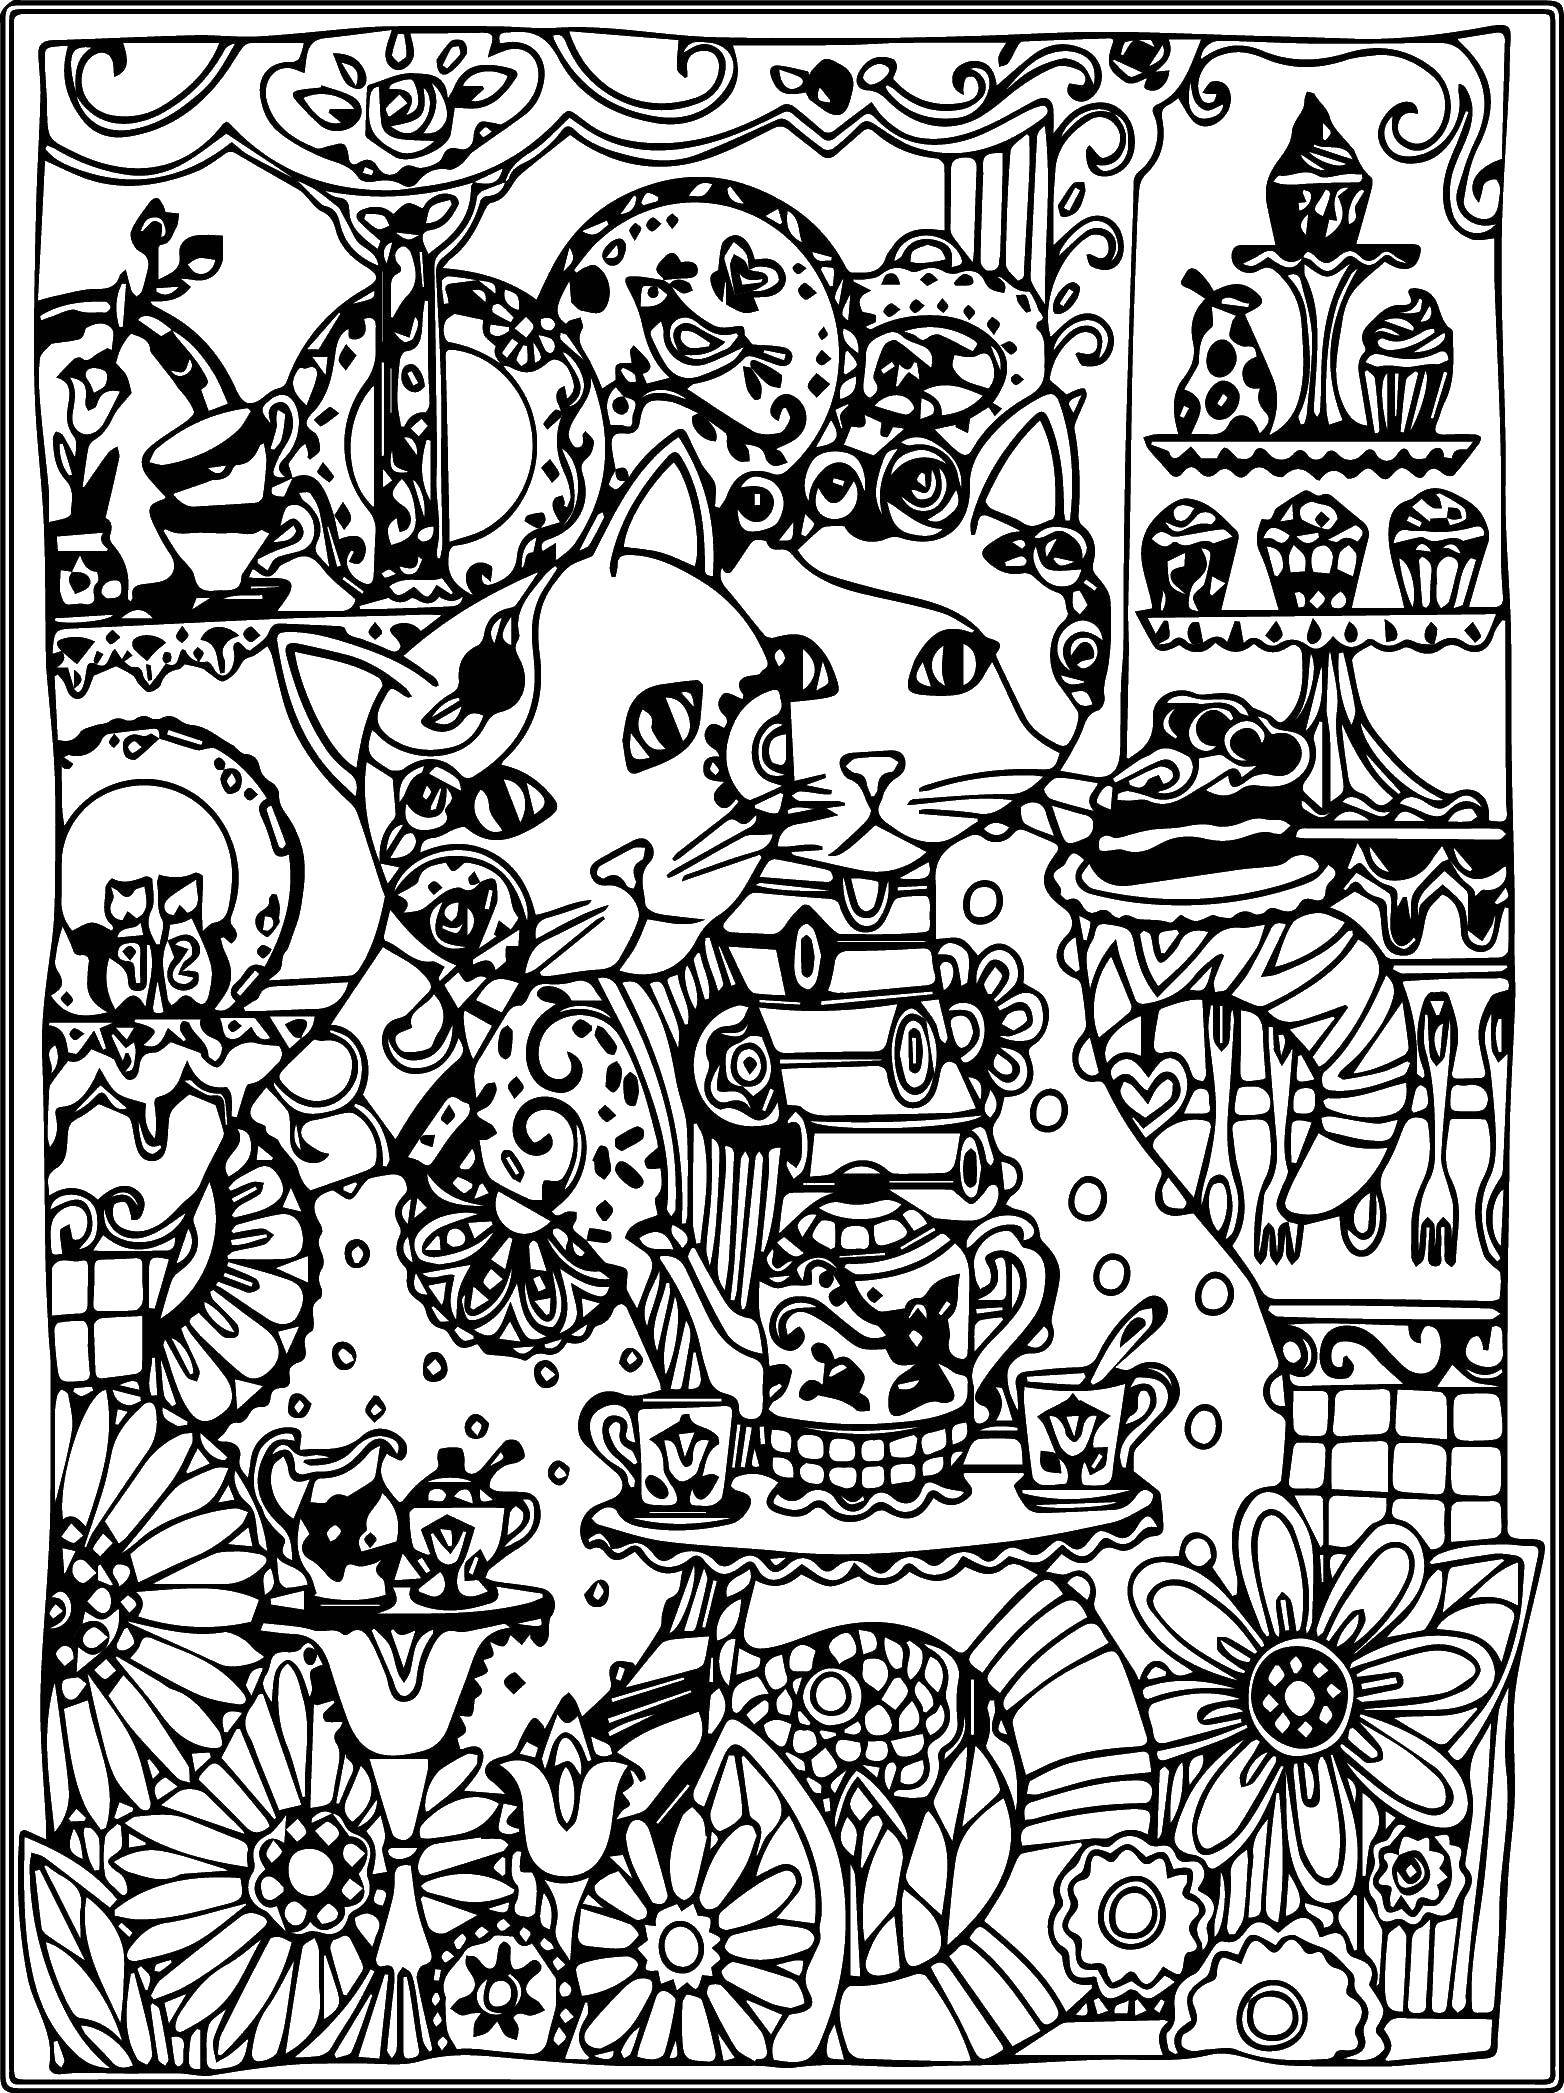 Coloring Cat in a candy store. Category For teenagers. Tags:  cat, Cup, cupcakes, kettle.